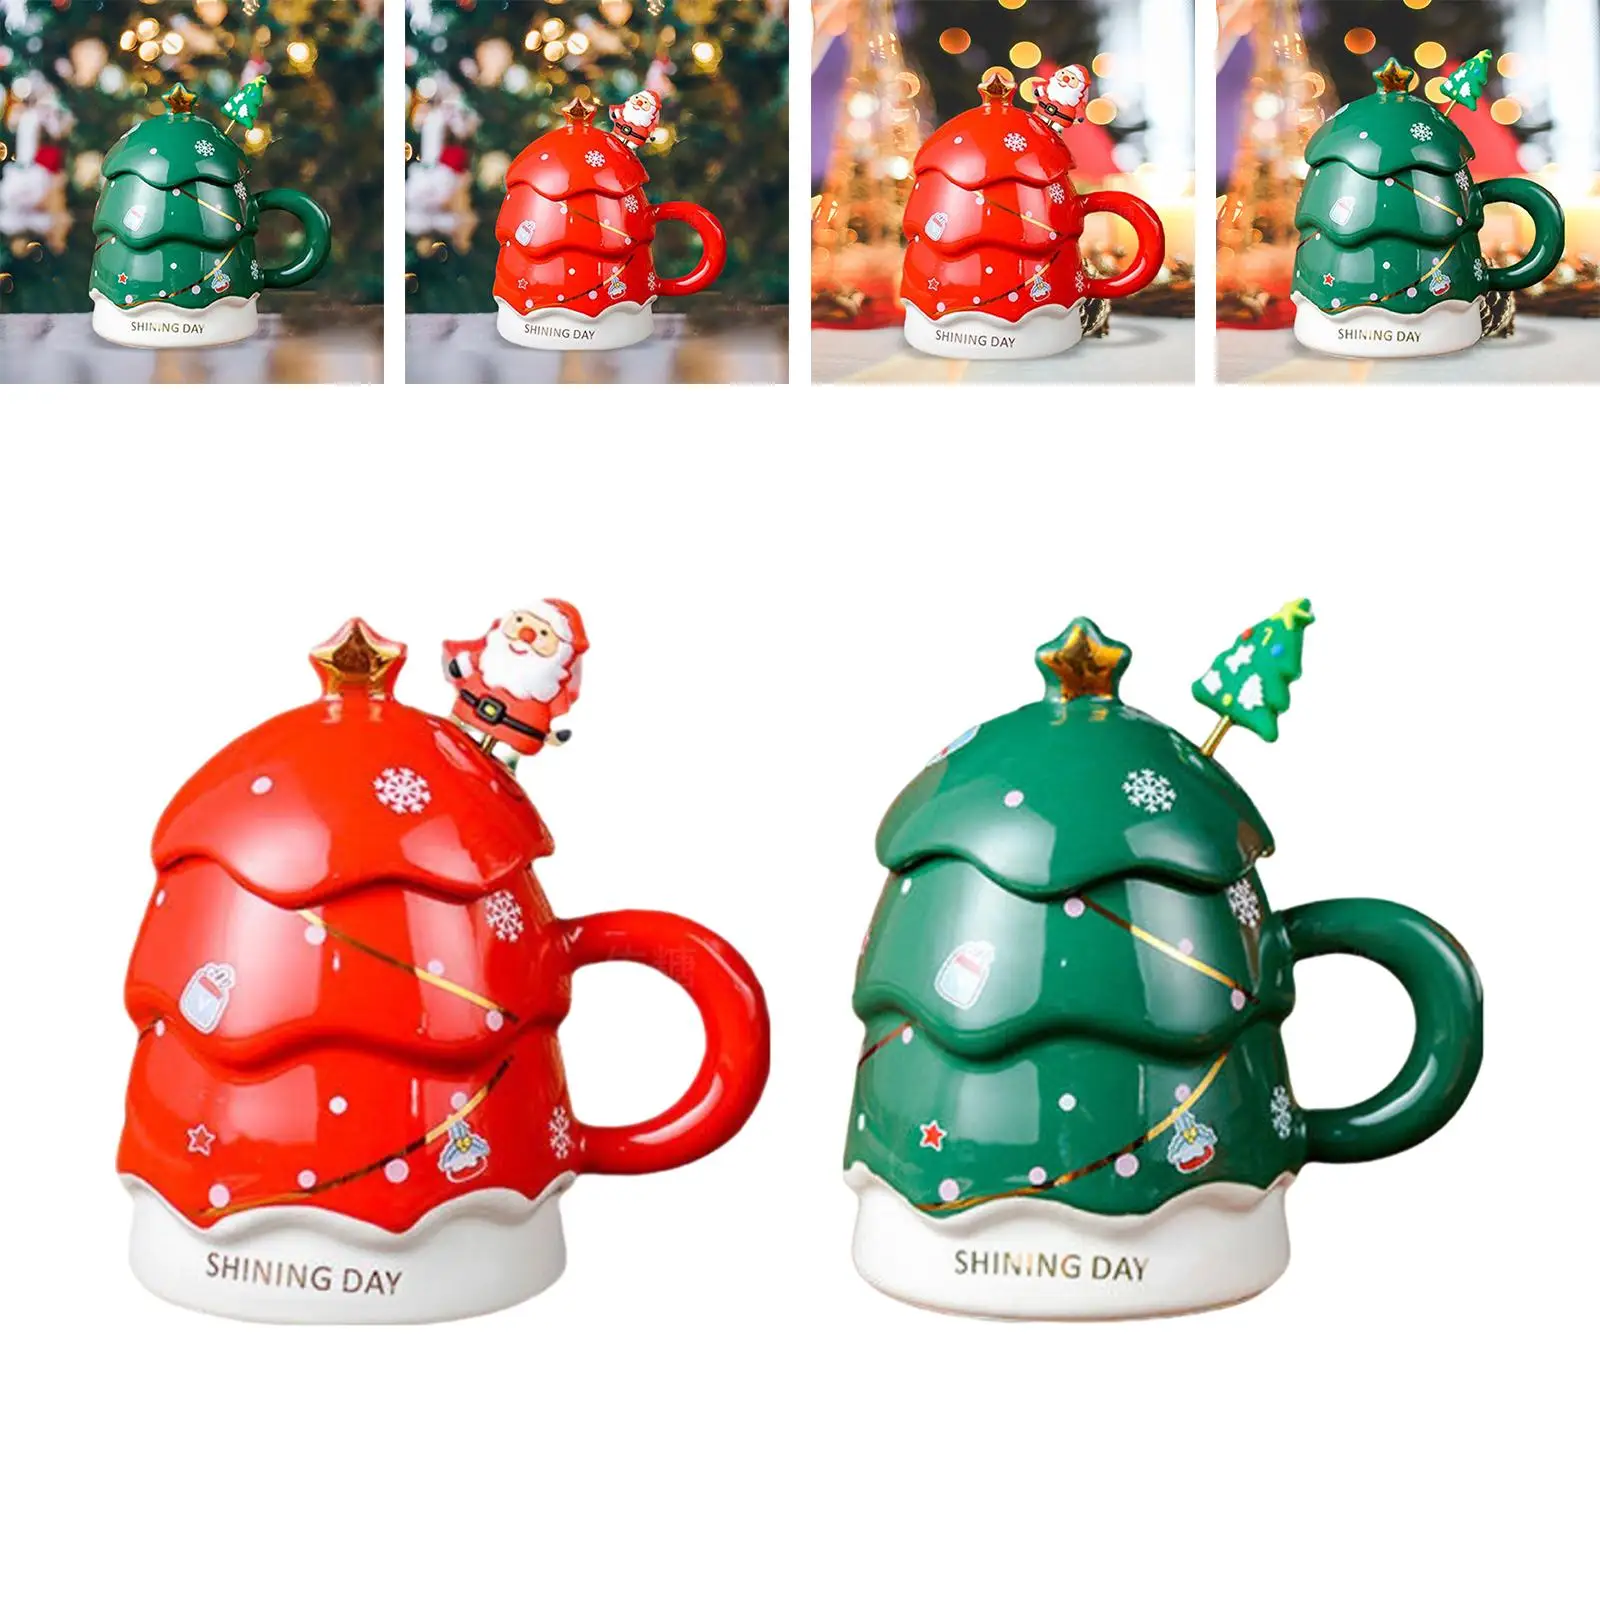 Christmas Tree Ceramic Coffee Mug Tableware with Lid Cover Milk Cups for Daily Using Kitchen Birthday Gift Home